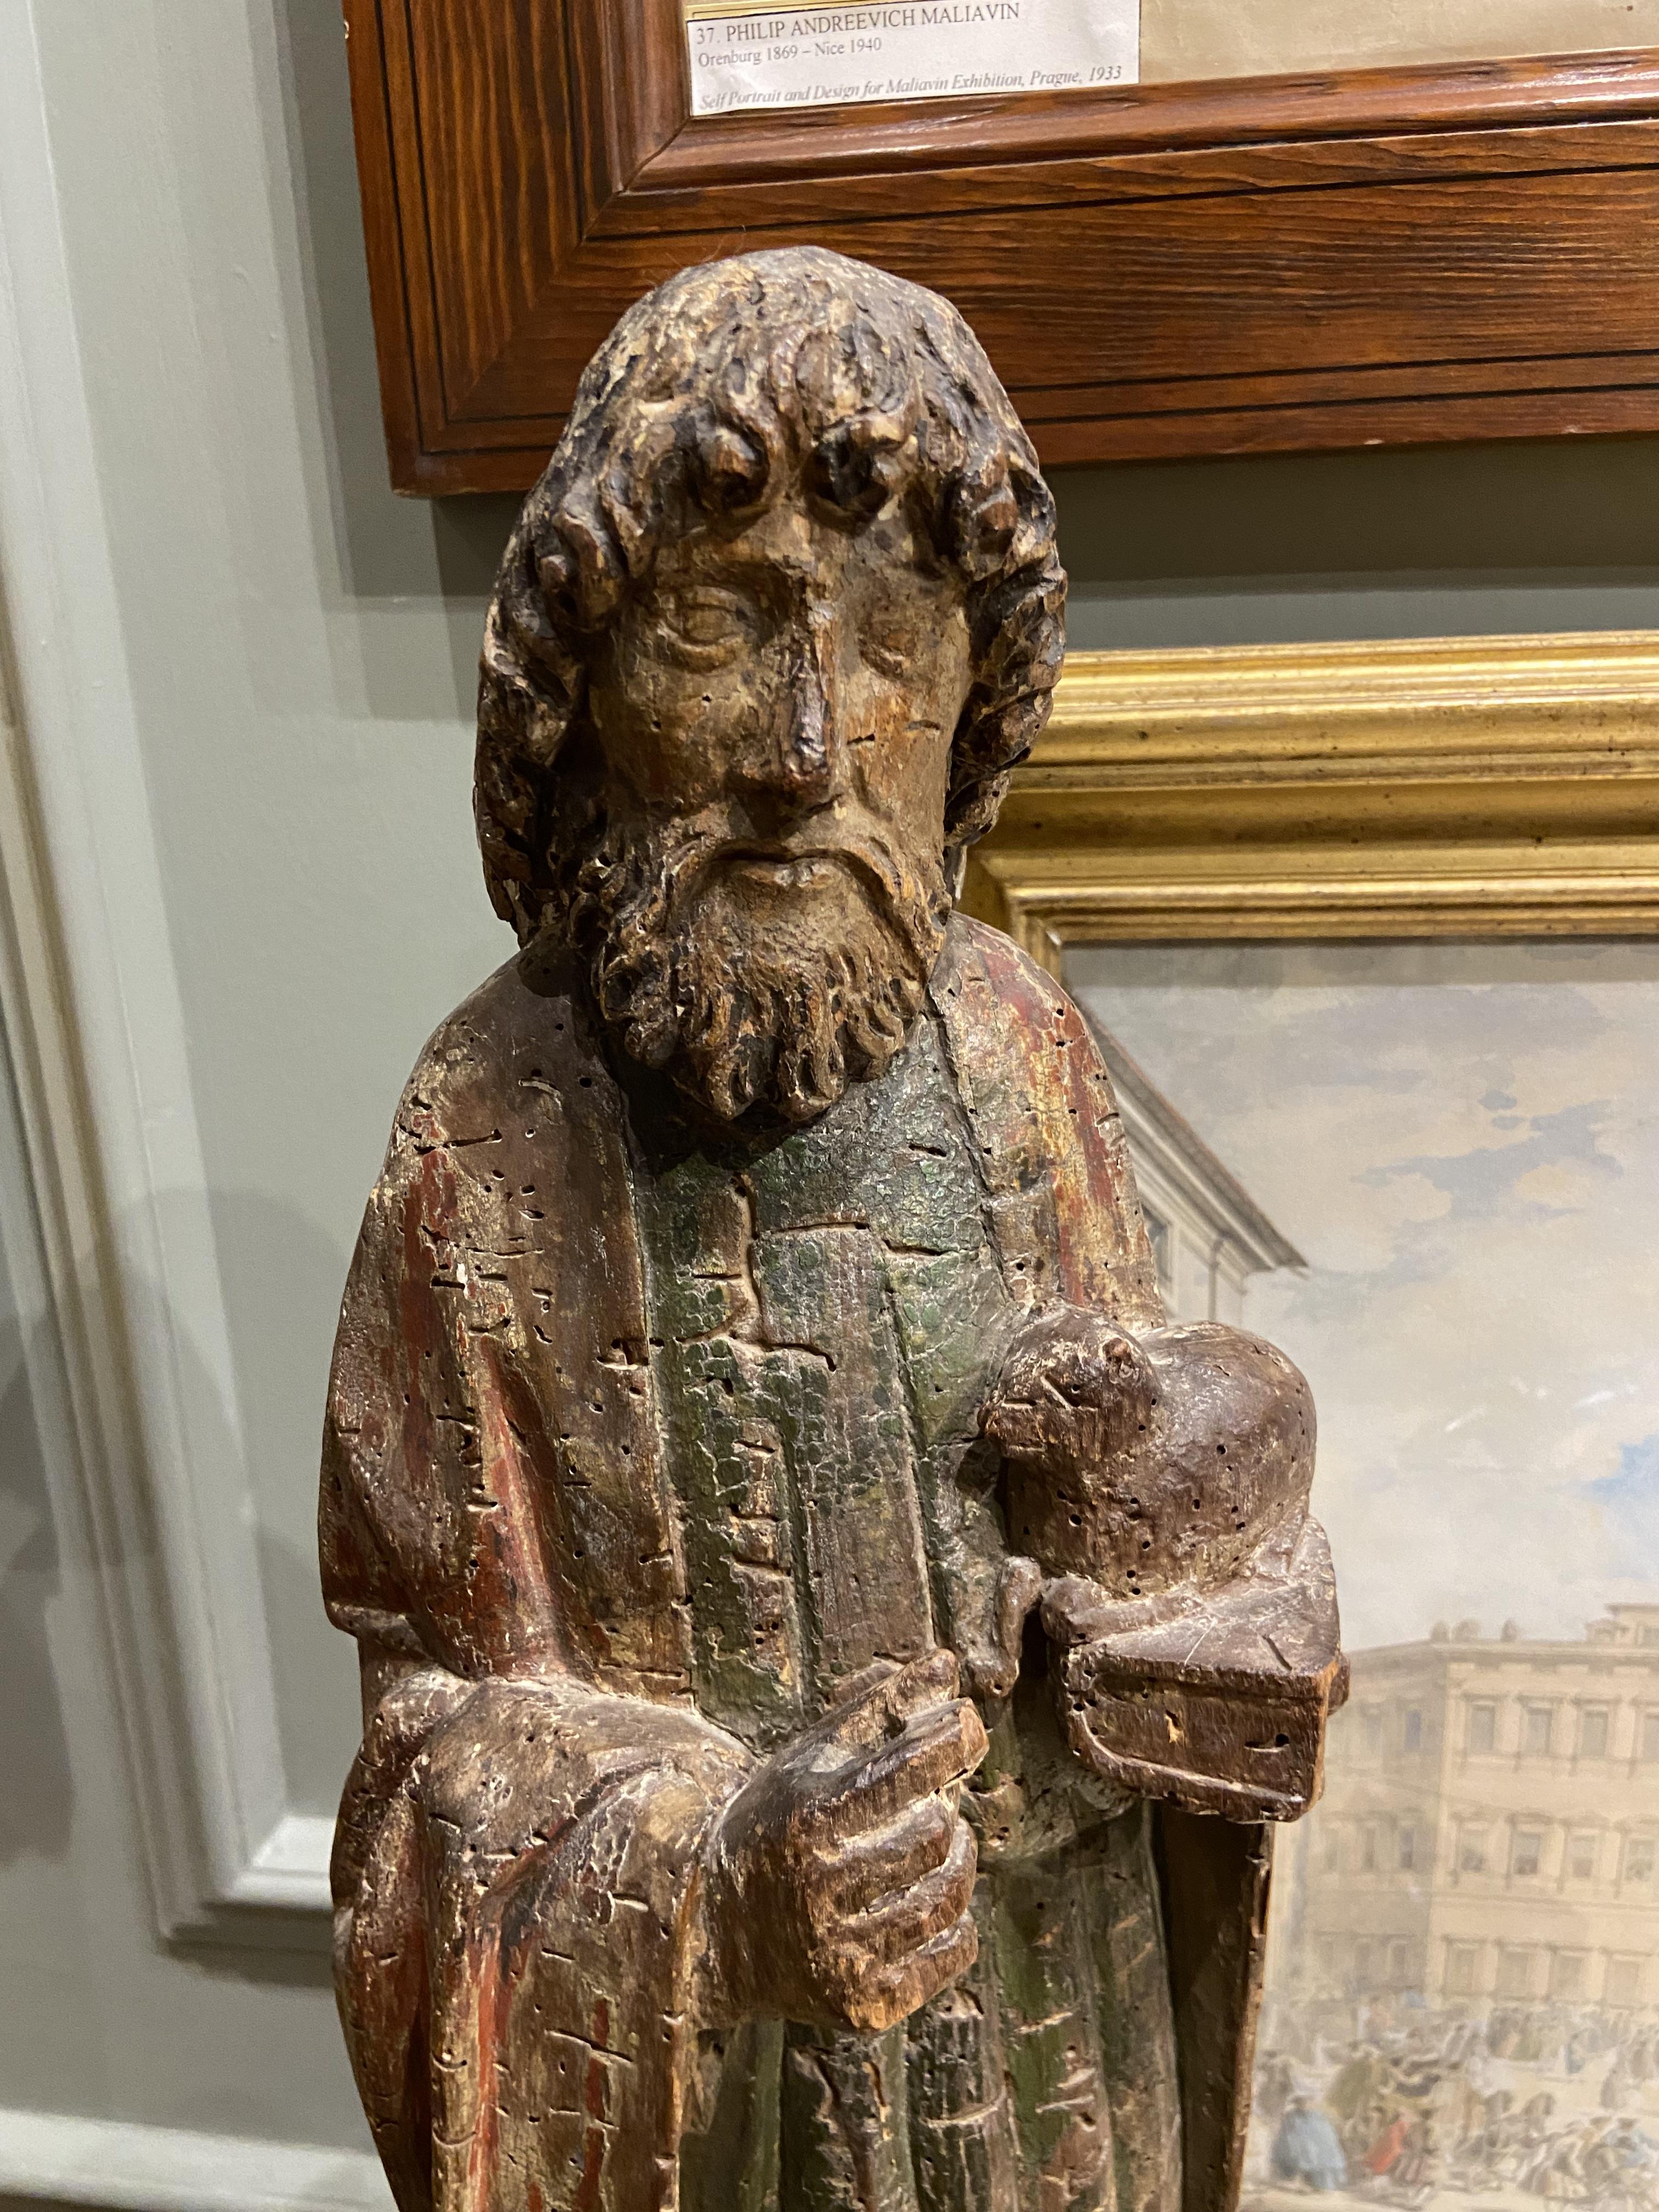 French (or Flemish), Late 15th / Early 16th Century, A wooden statue of St. John the Evangelist hold - Image 5 of 8